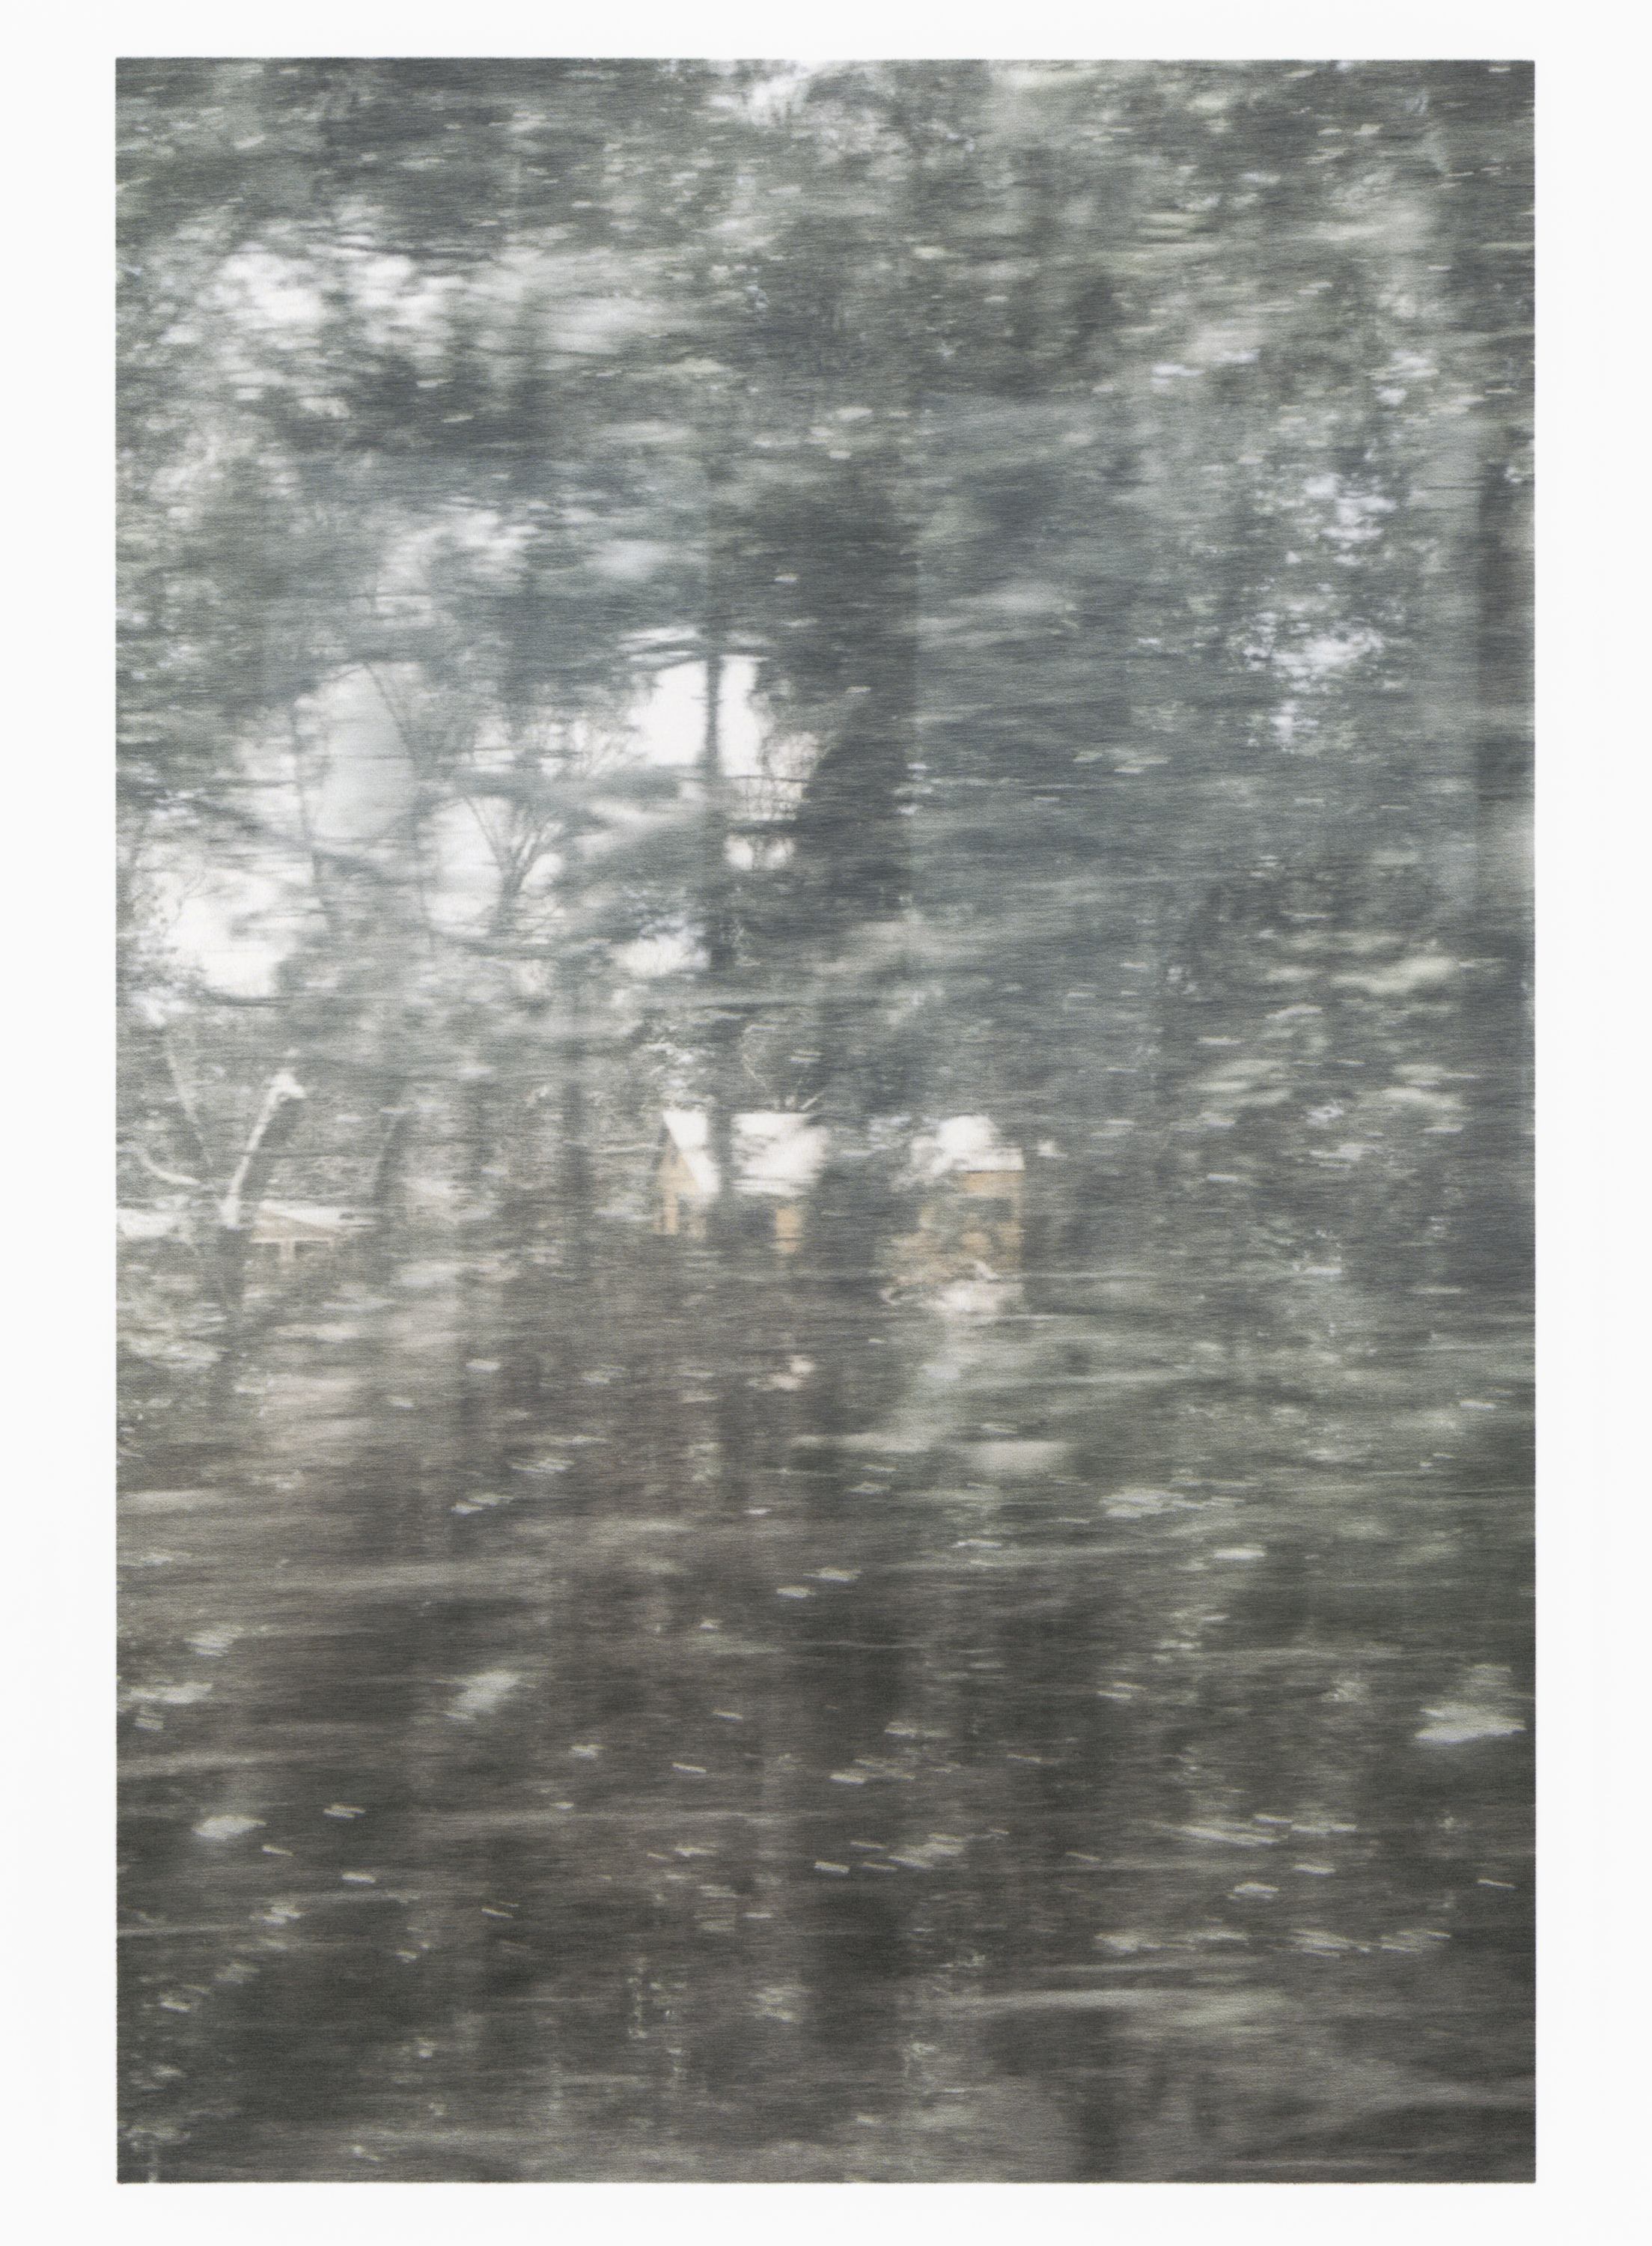 Untitled (glass, forest, house)